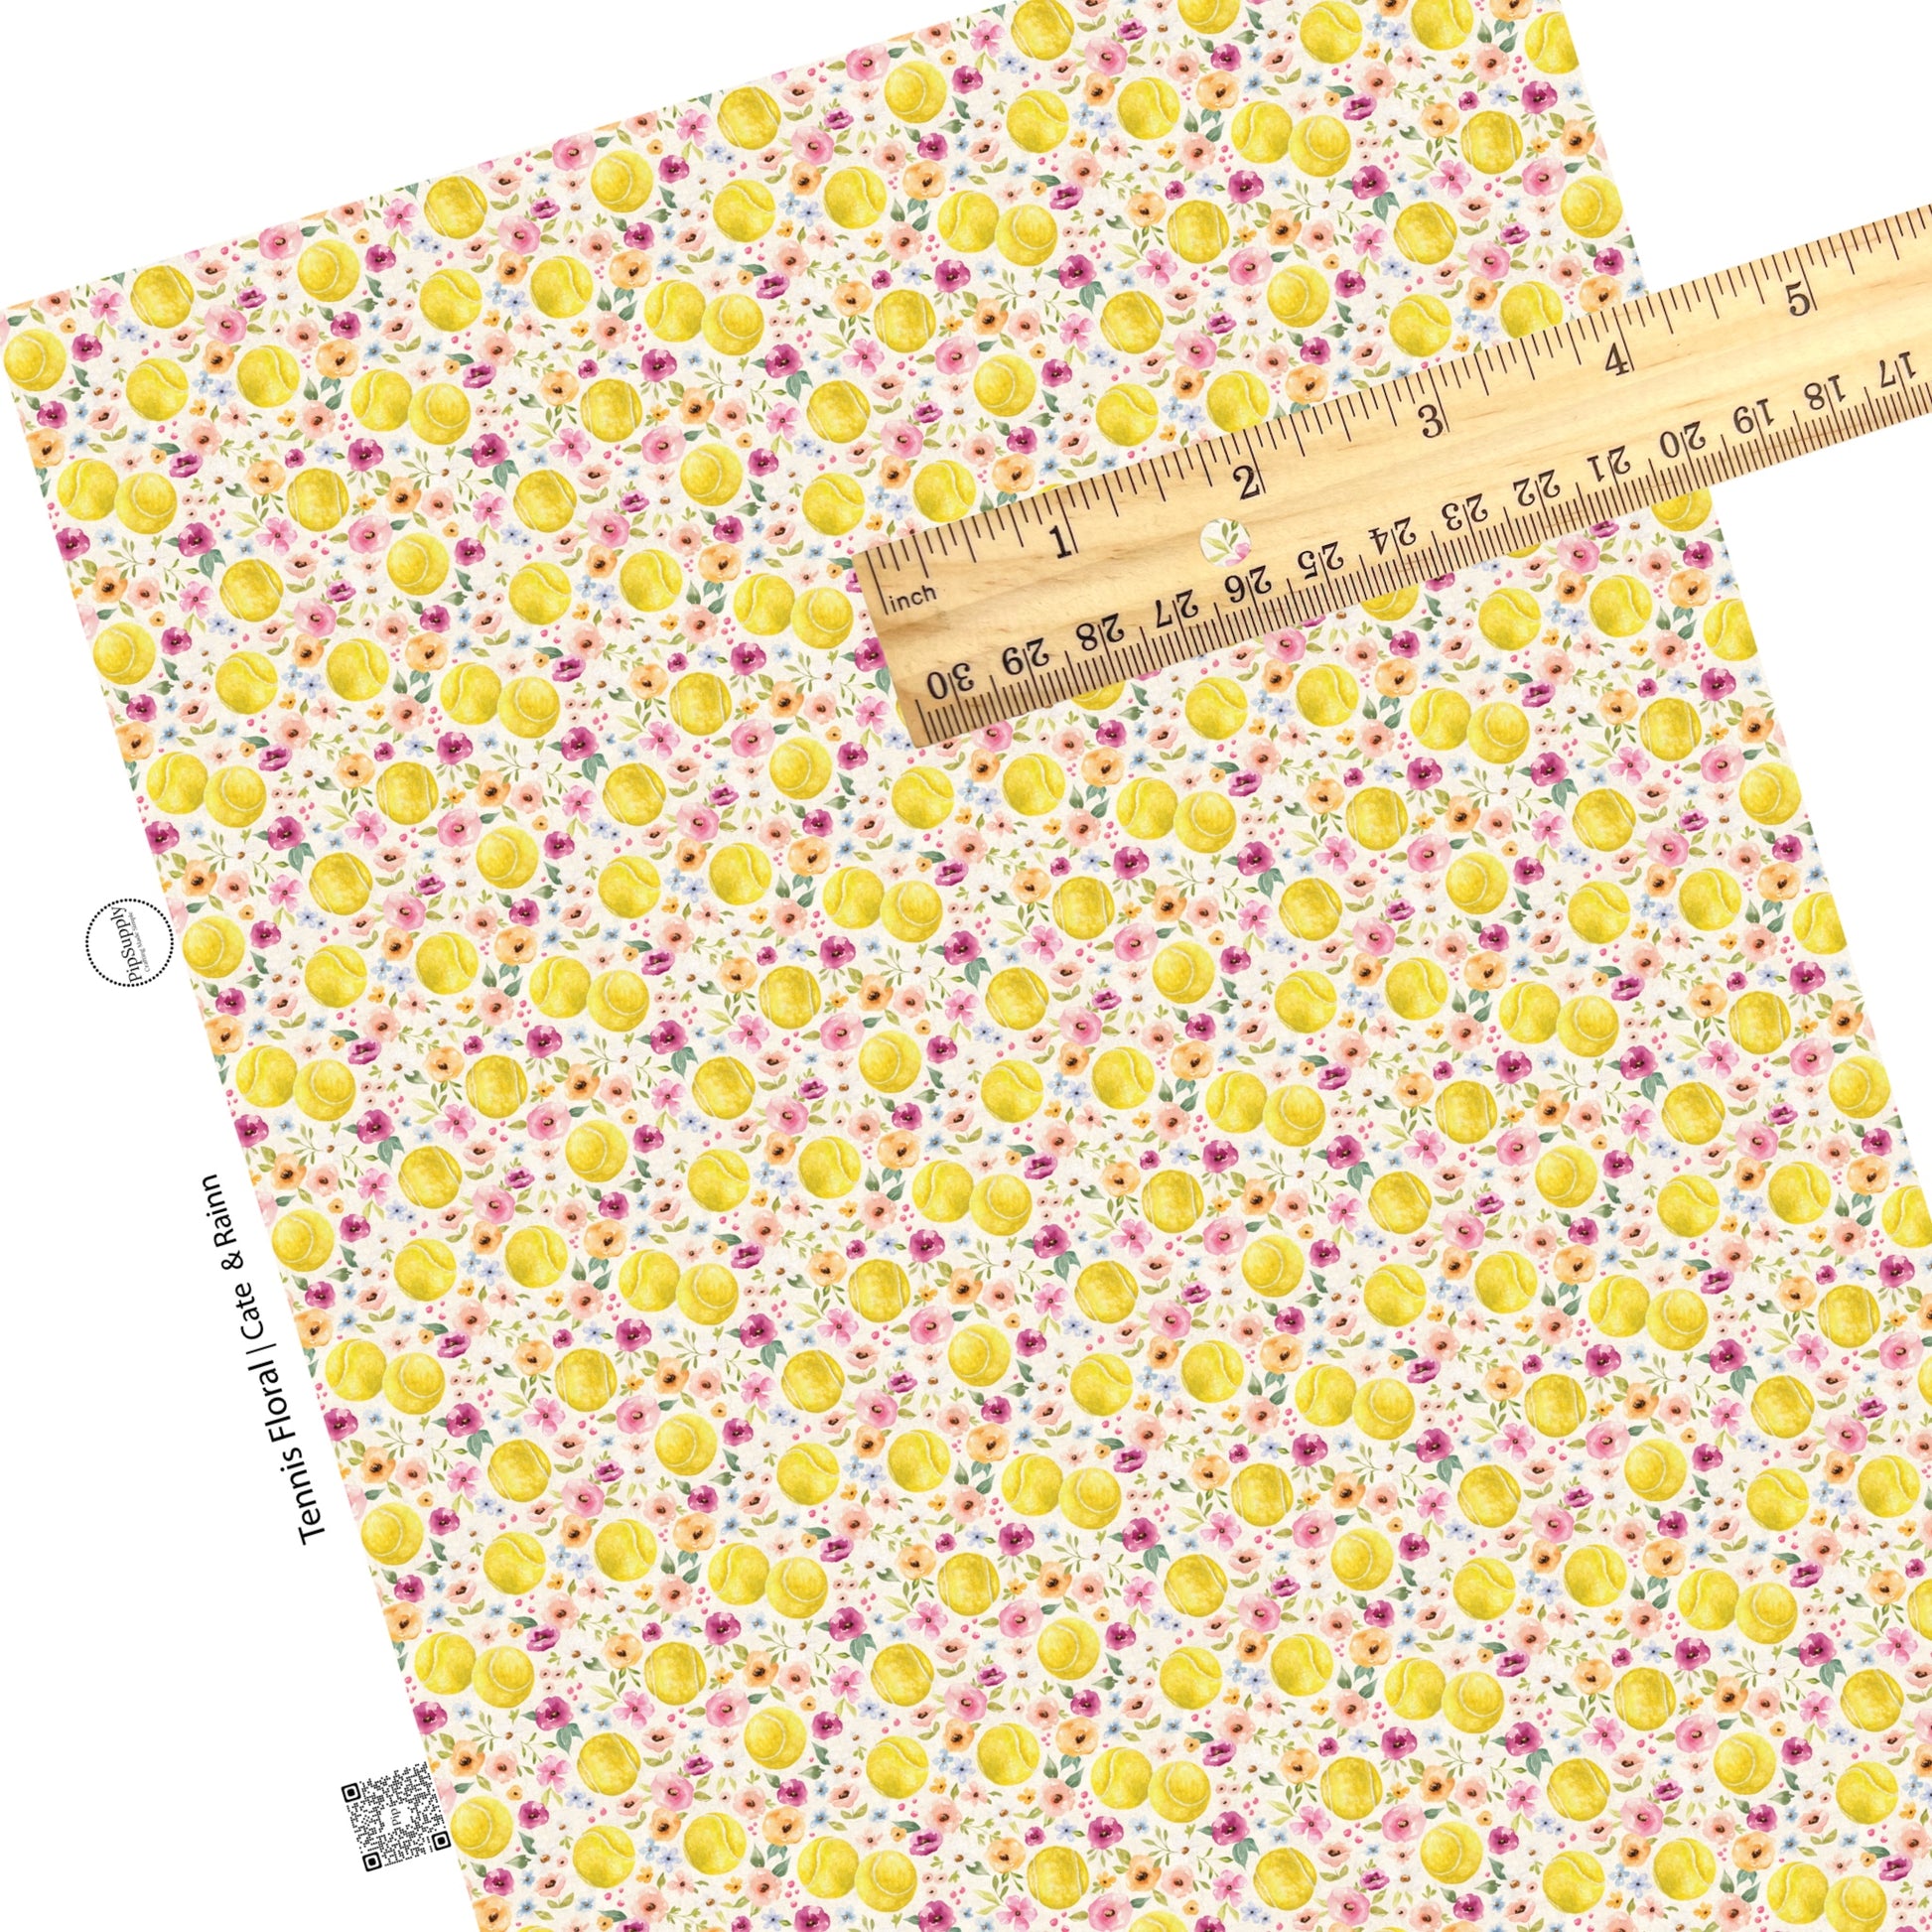 These spring floral sport pattern themed faux leather sheets contain the following design elements: tennis balls surrounded by flowers on cream. Our CPSIA compliant faux leather sheets or rolls can be used for all types of crafting projects.